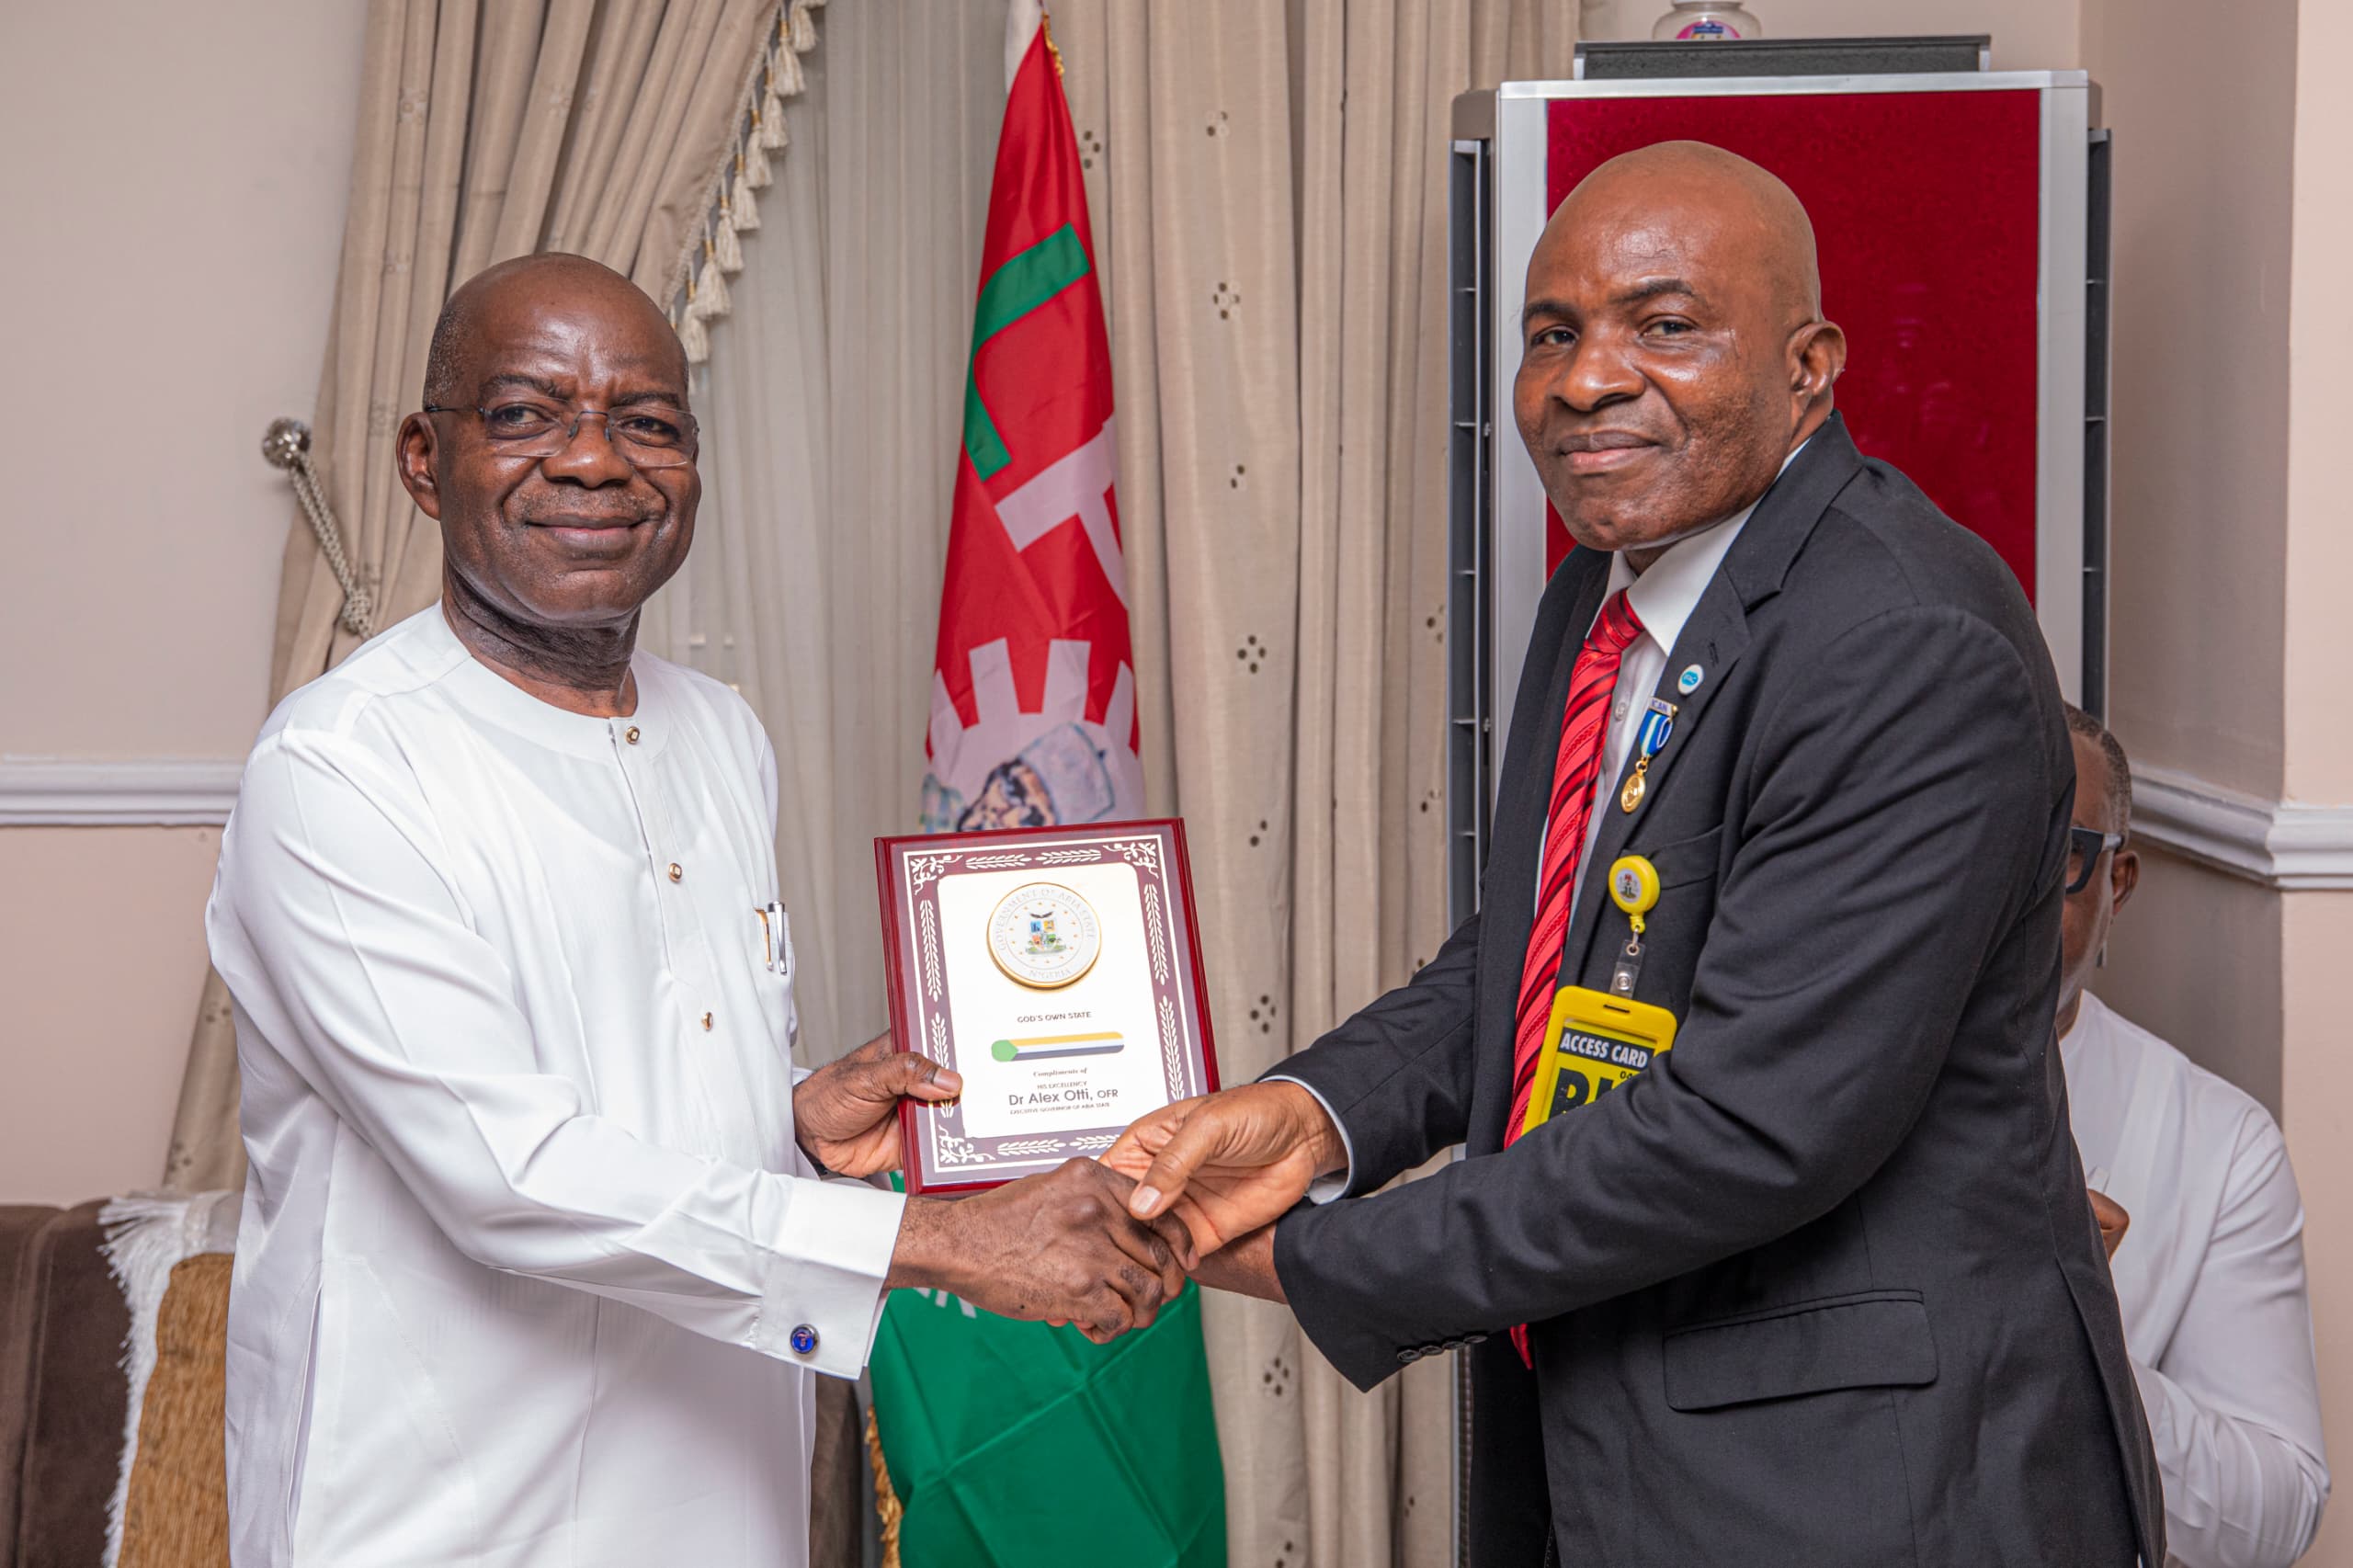 ICAN lauds Governor Otti’s exemplary leadership, transformation of Abia